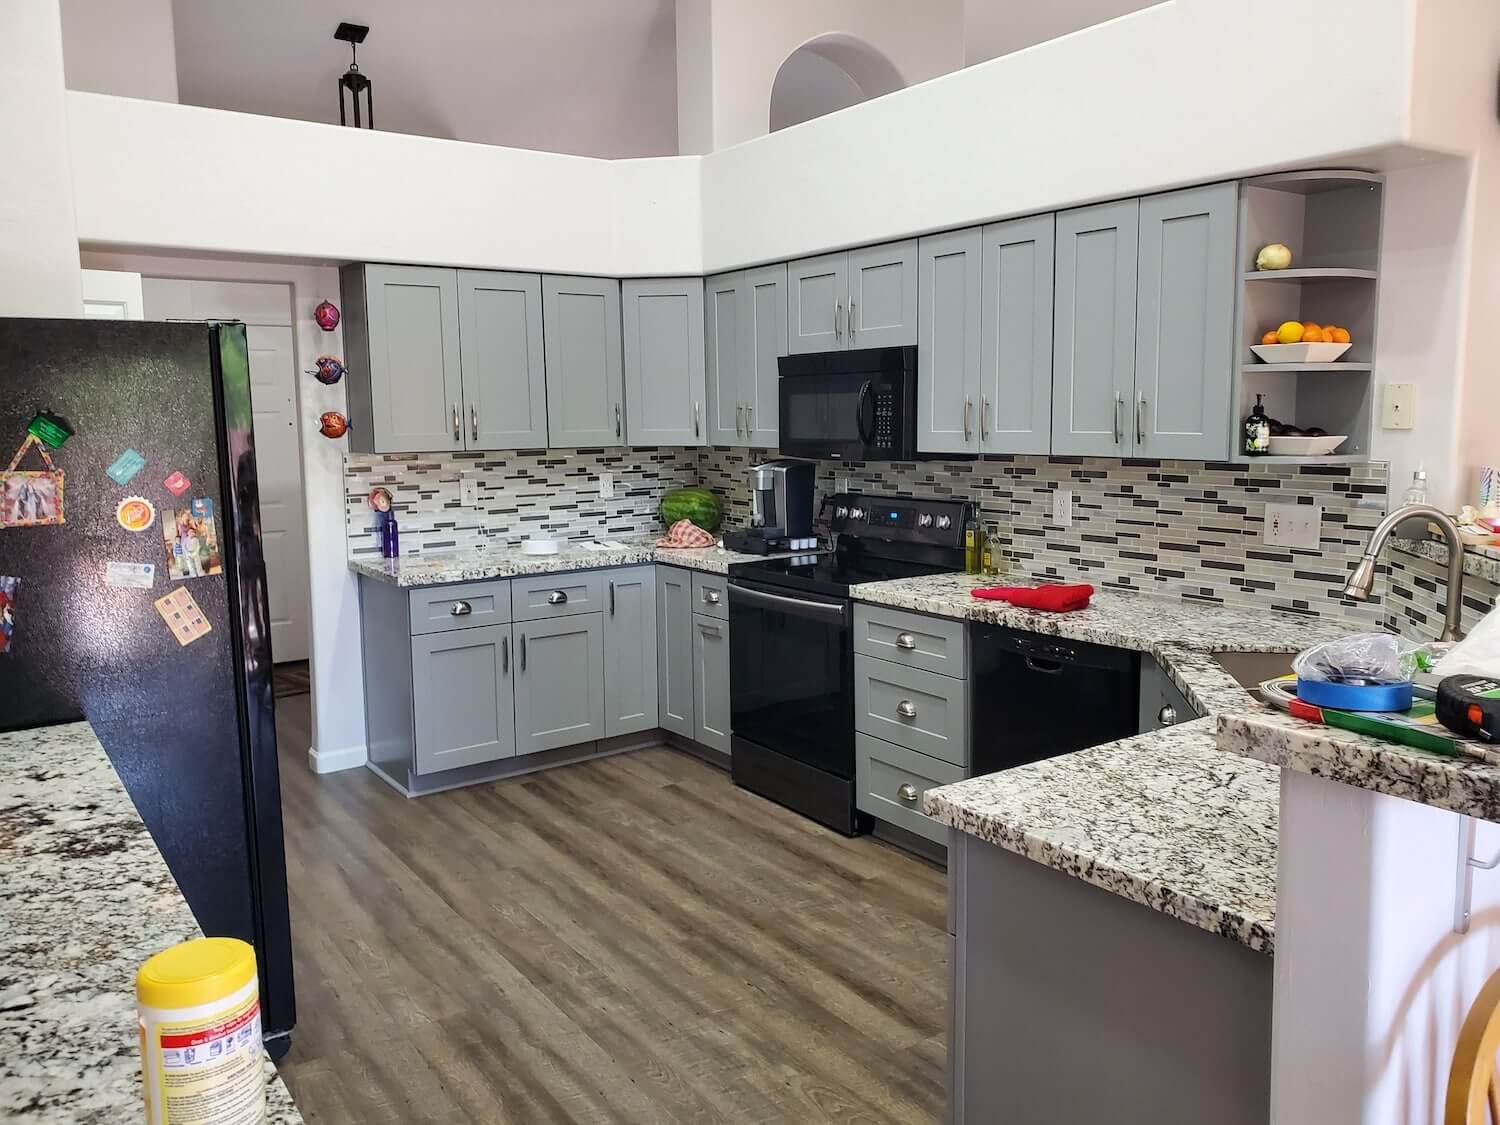 An example of major home renovations in the kitchen area